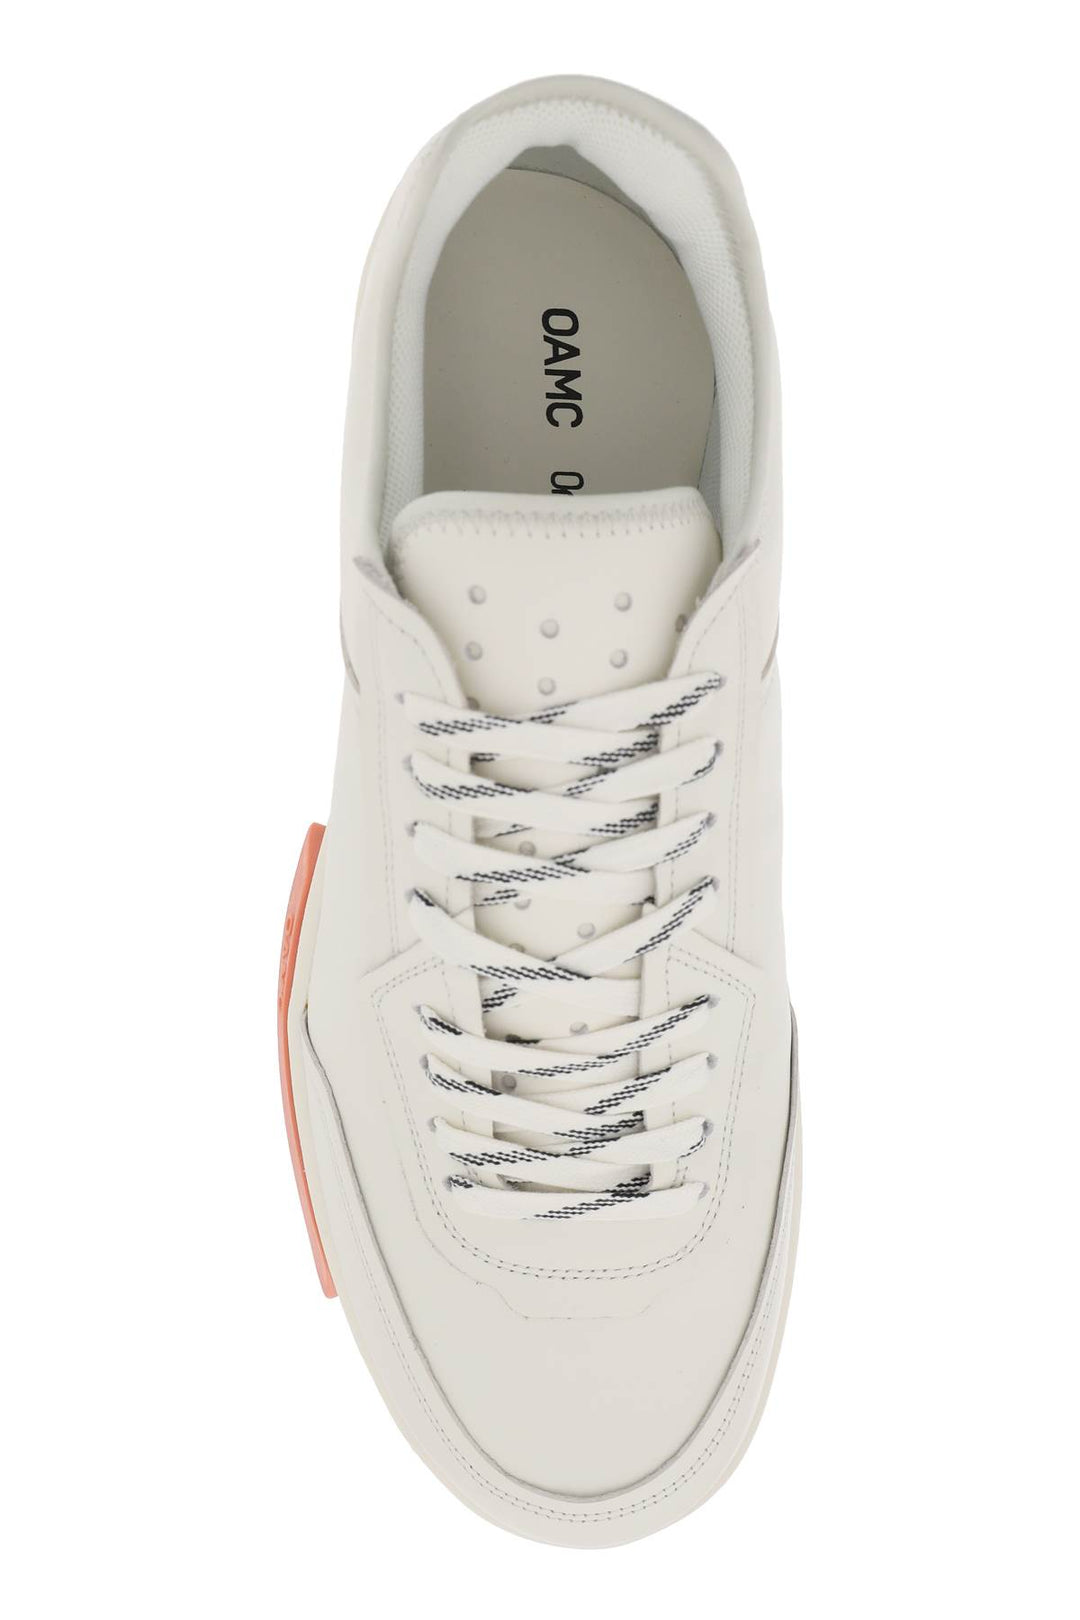 Oamc 'Cosmos Cupsole' Sneakers   White